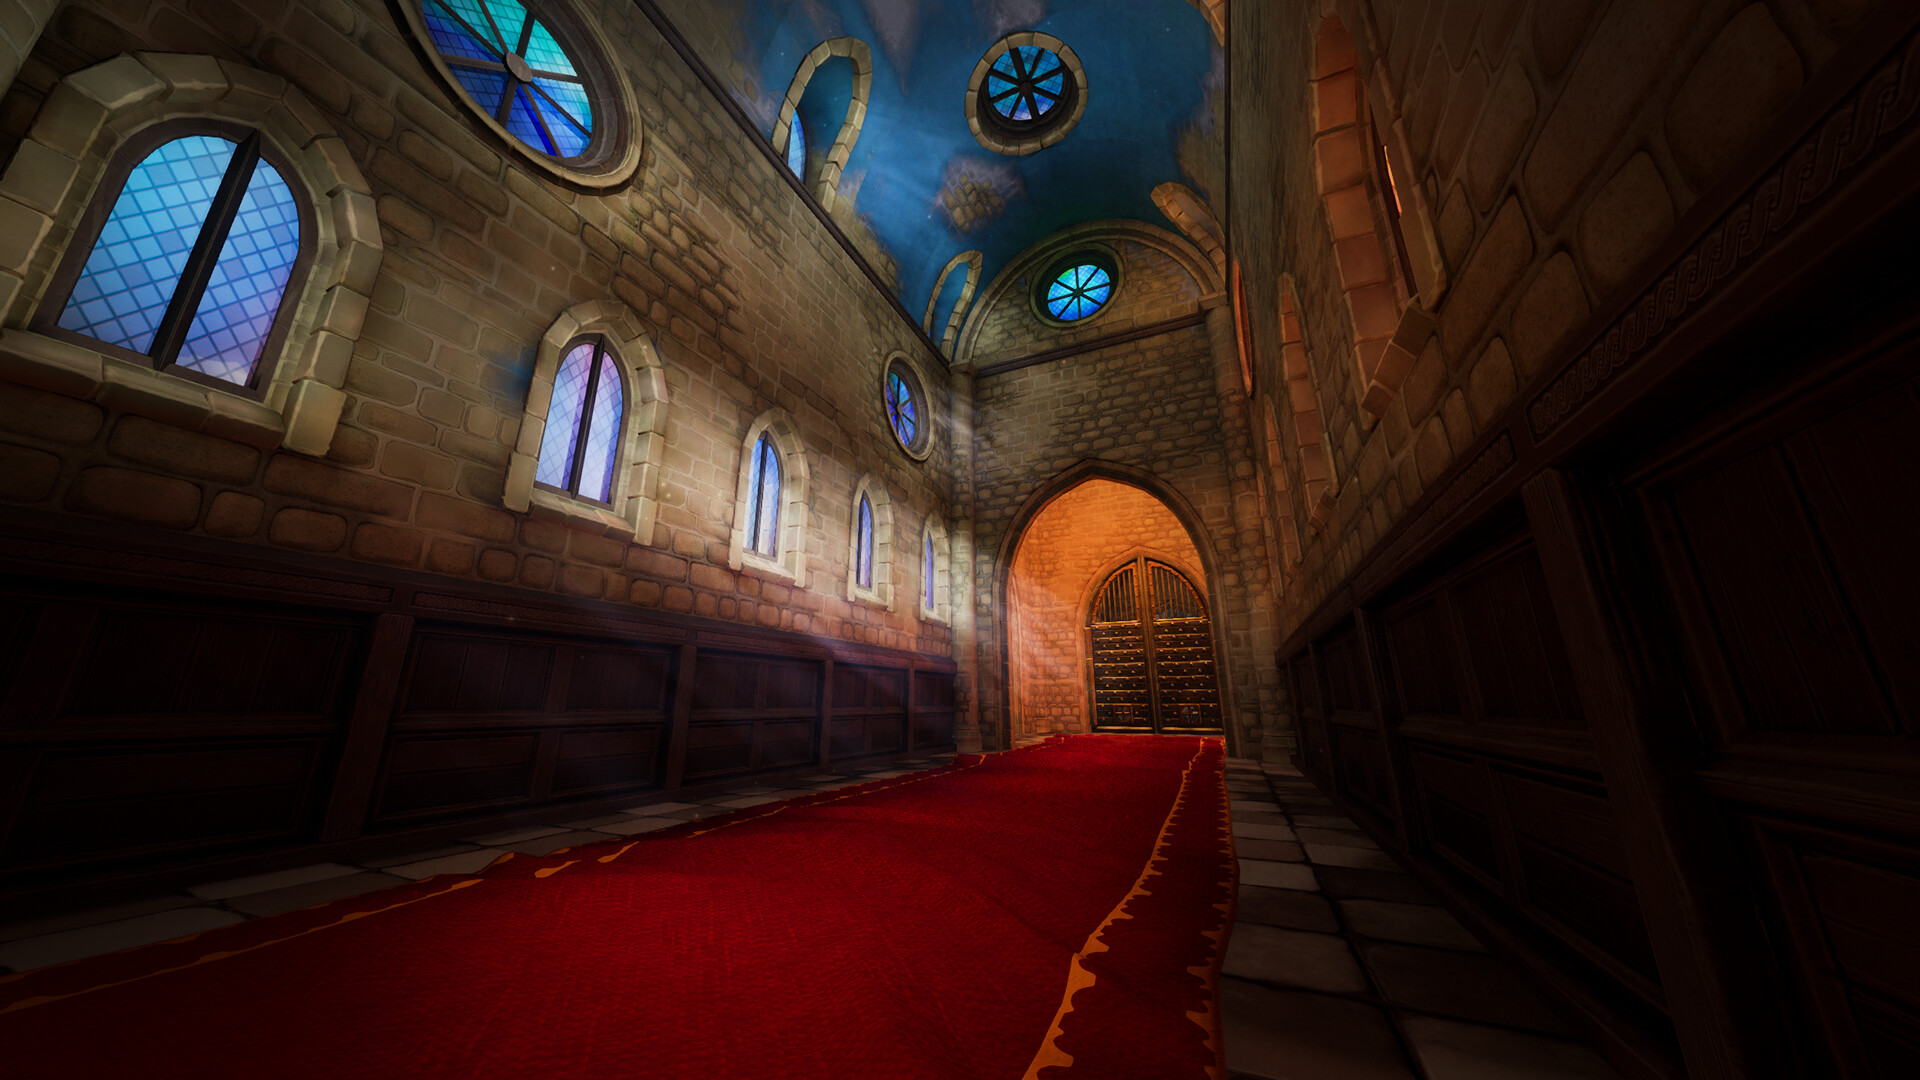 Castle hallway with windows and red carpet